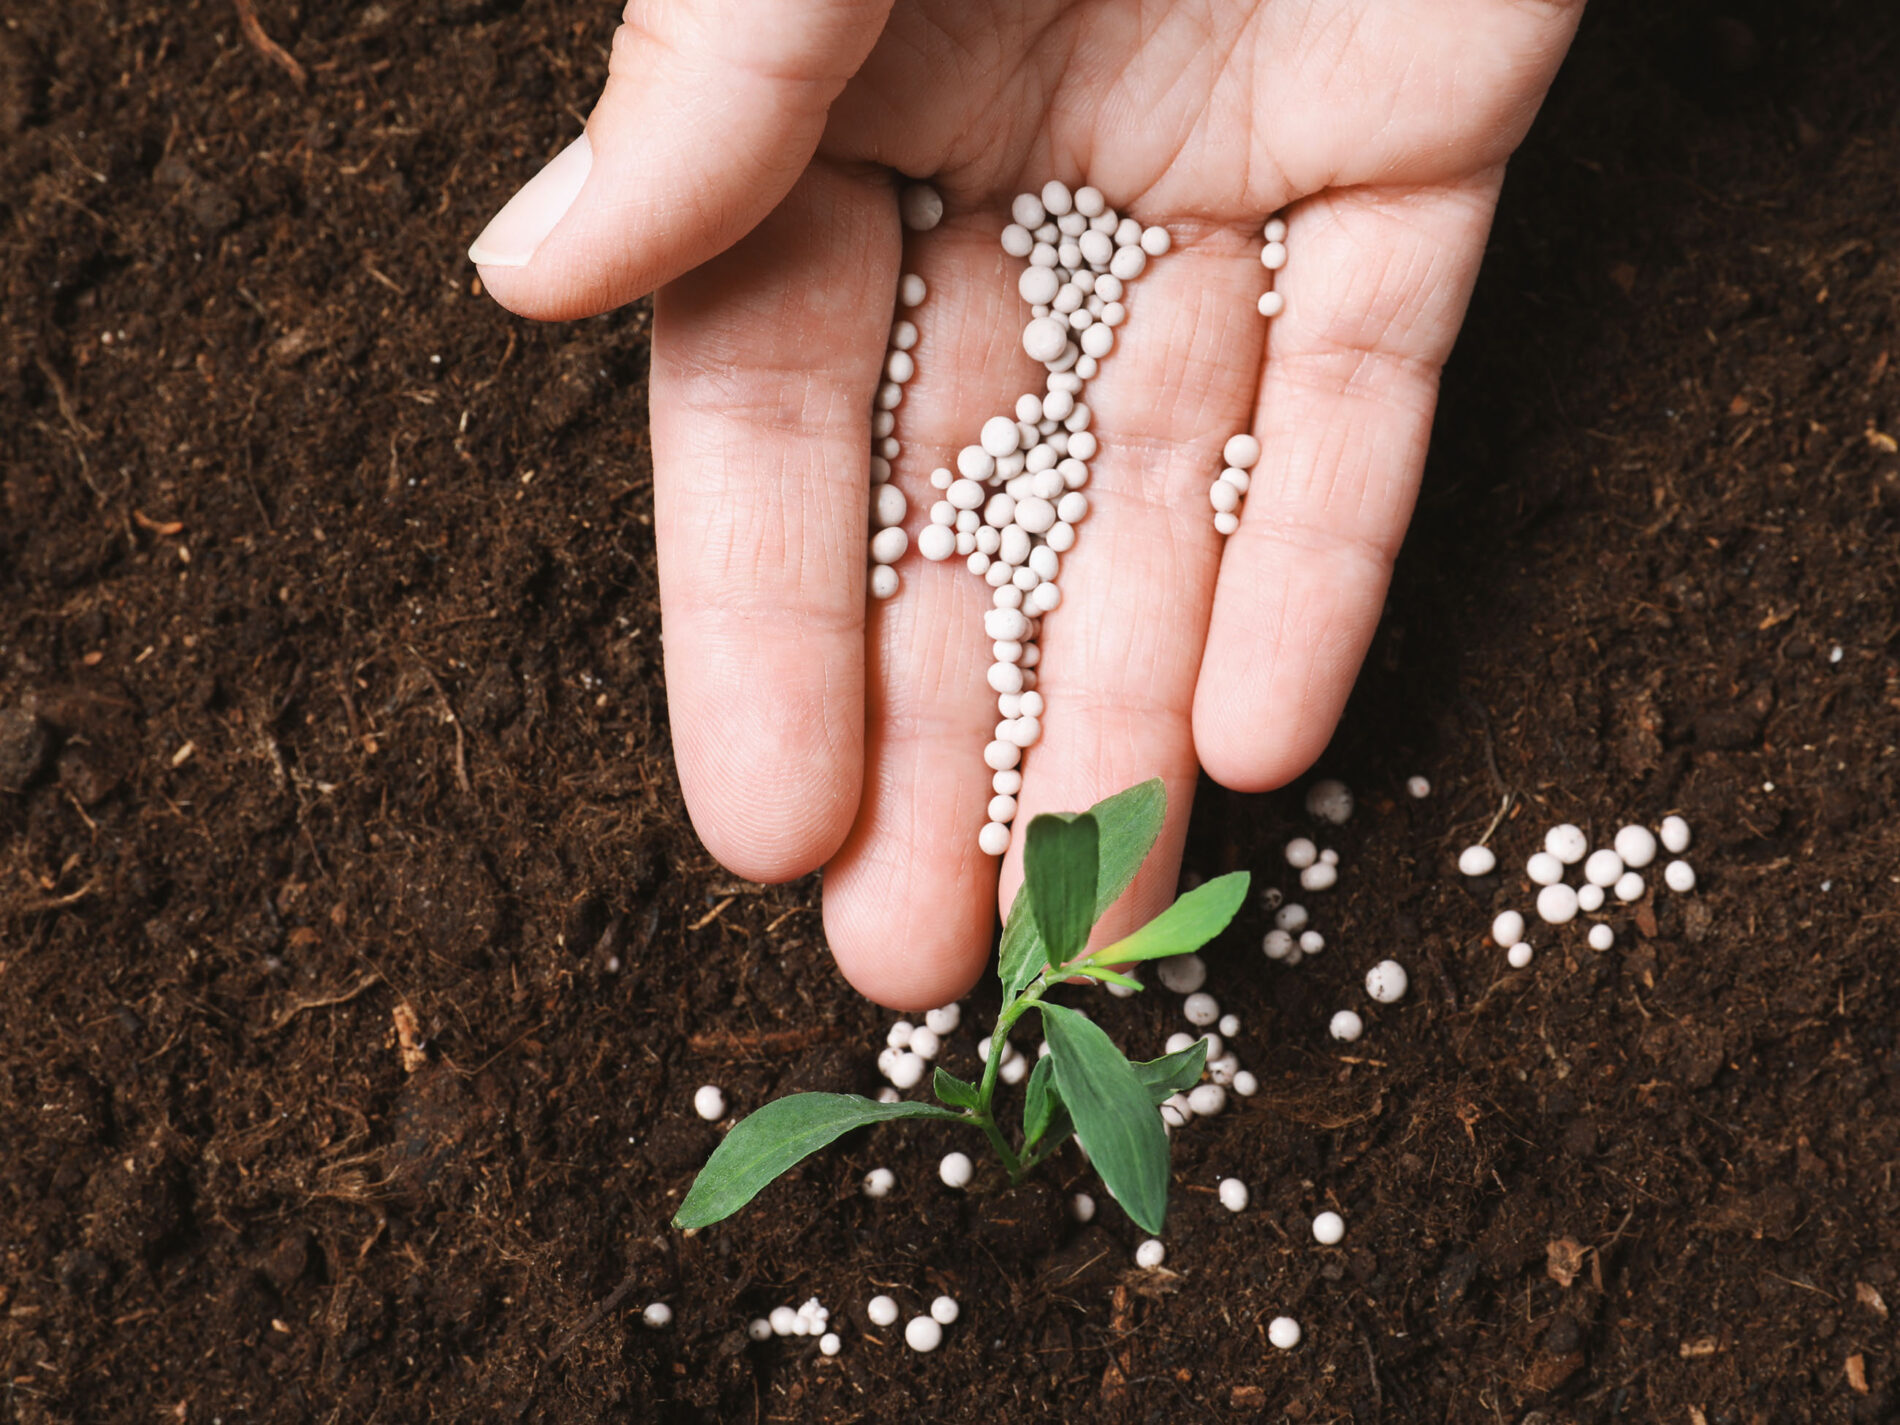 fertiliser being given by hand to a plant